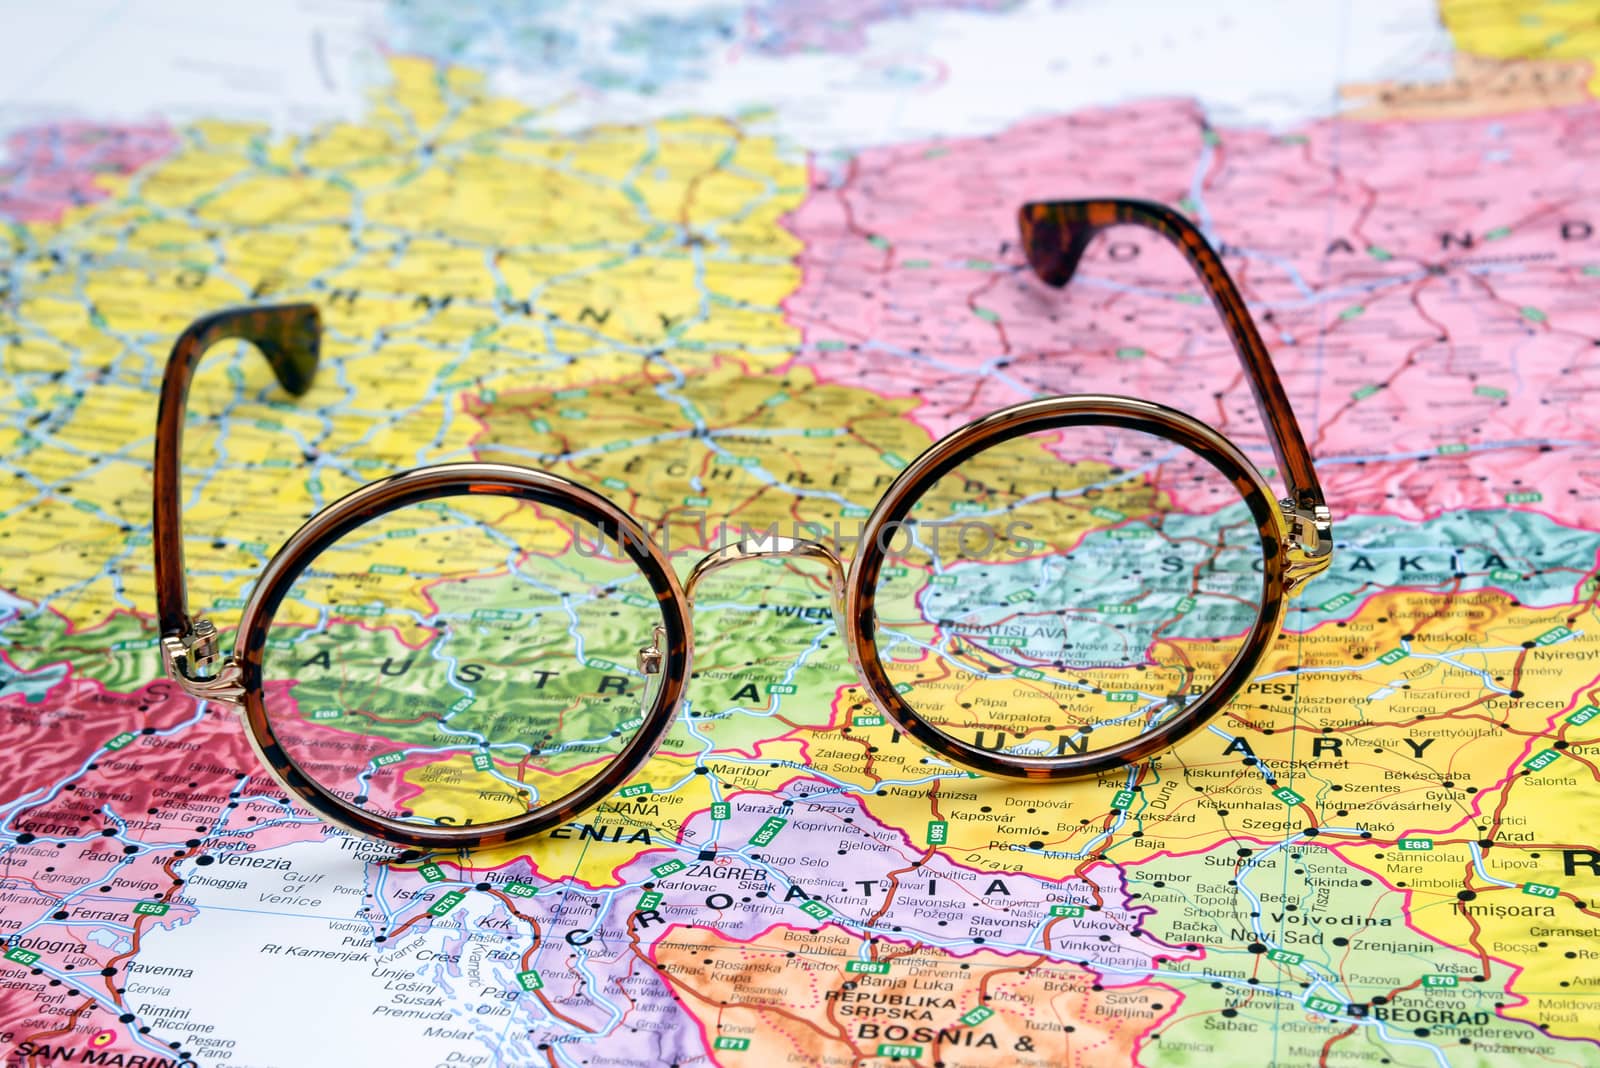 Glasses on a map of europe - Austria by dk_photos